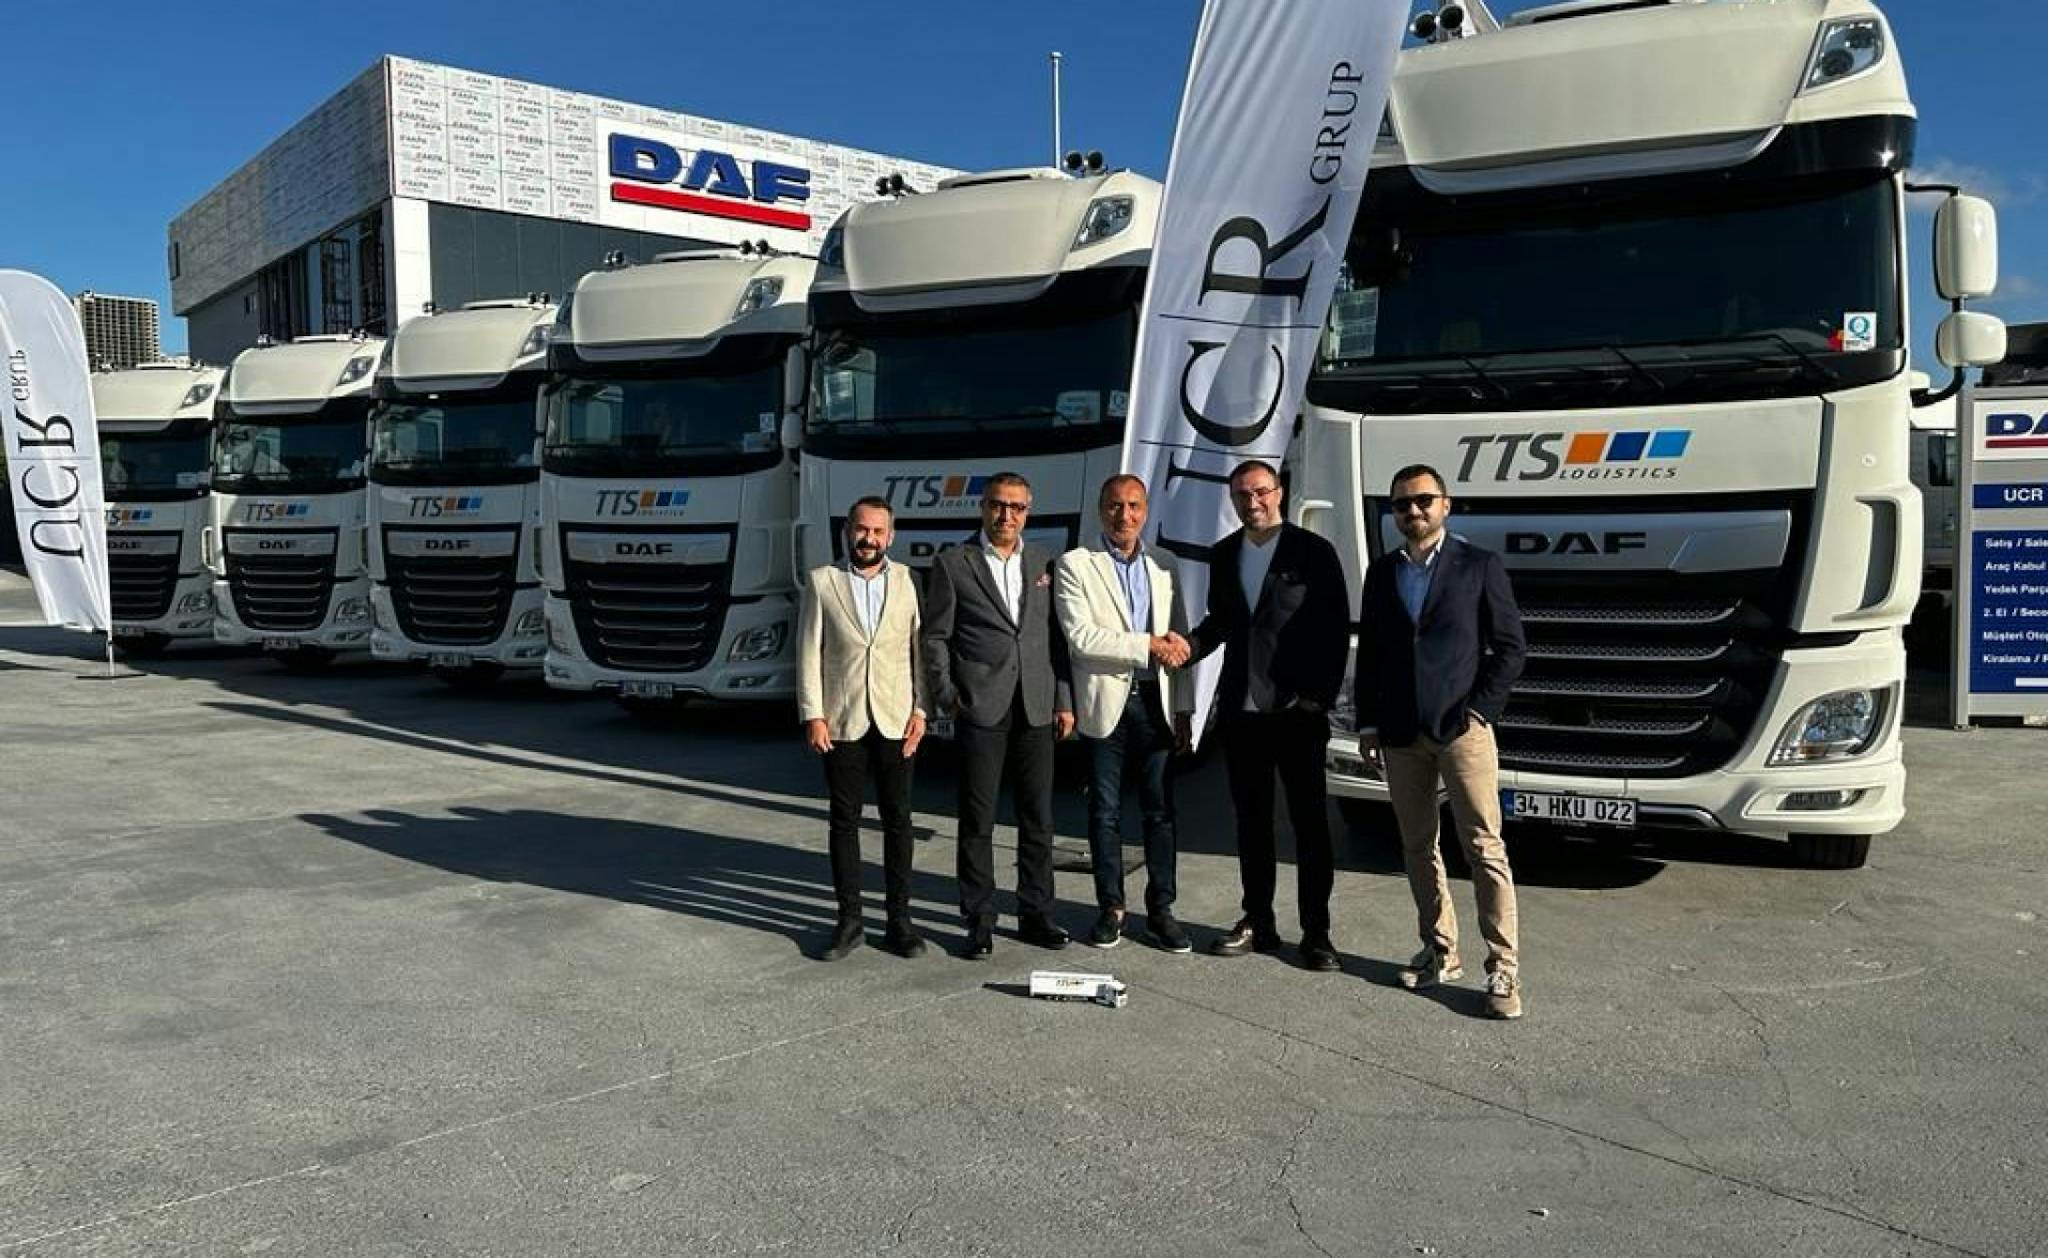 We took delivery of 7 new DAF Trucks Turkey XF 480 SSC FT E6 model tractors!